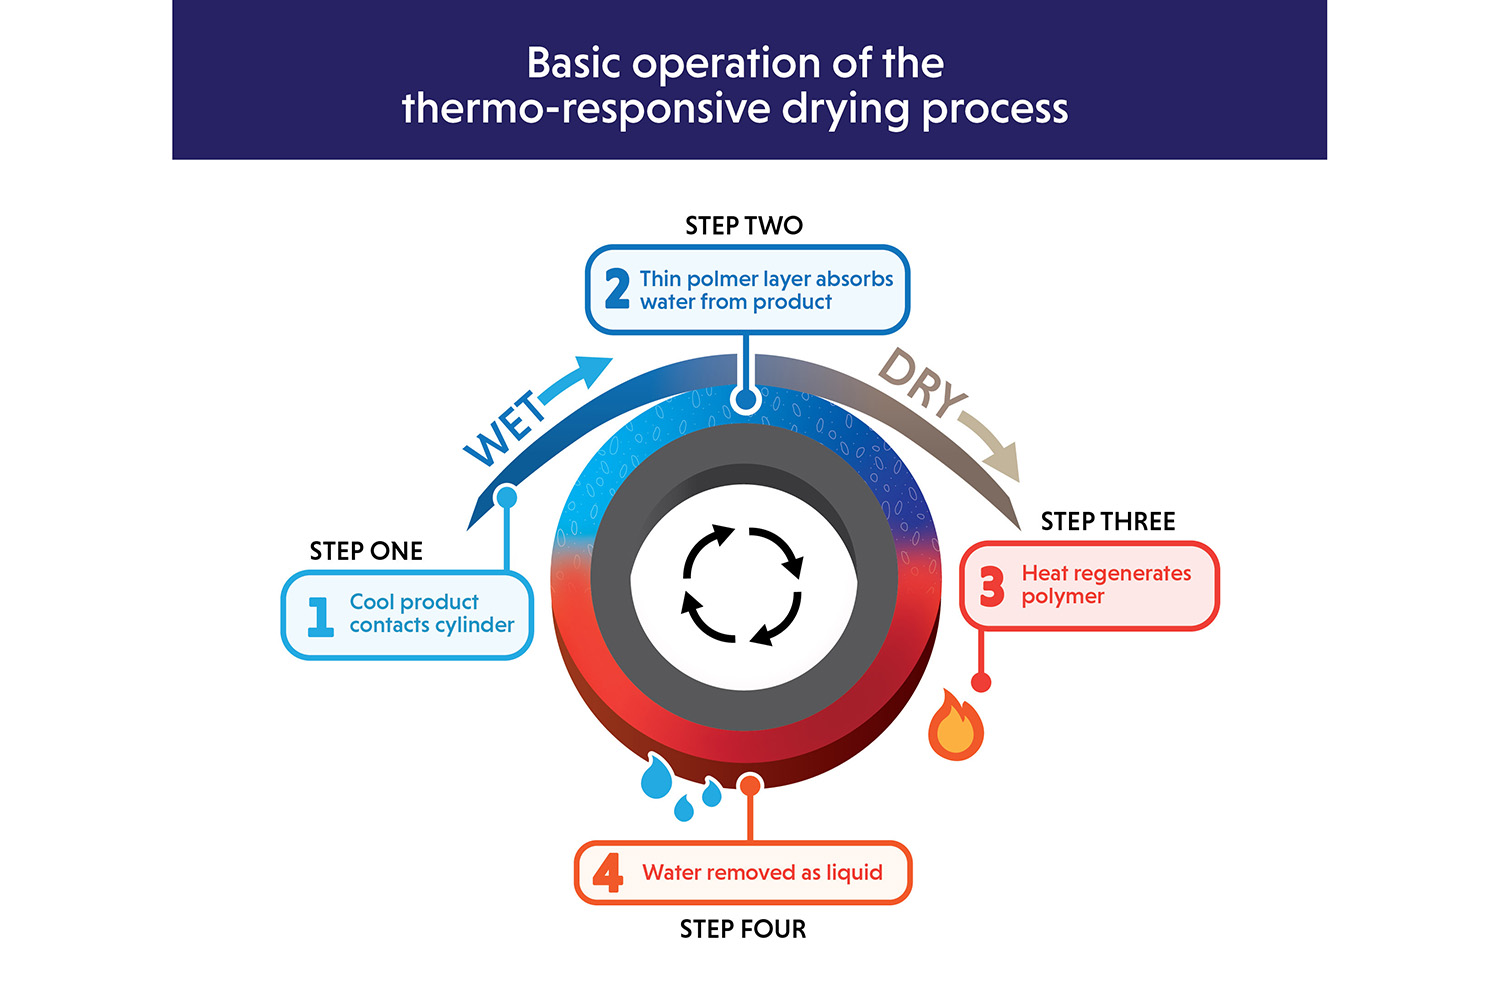 Basic operation of the thermo-responsive drying process: Step One-Cool product contacts cylinder, Step Two-Thin polymer layer absorbs water from product, Step Three-Heat regenerates polymer and Step Four-Water removed as liquid.